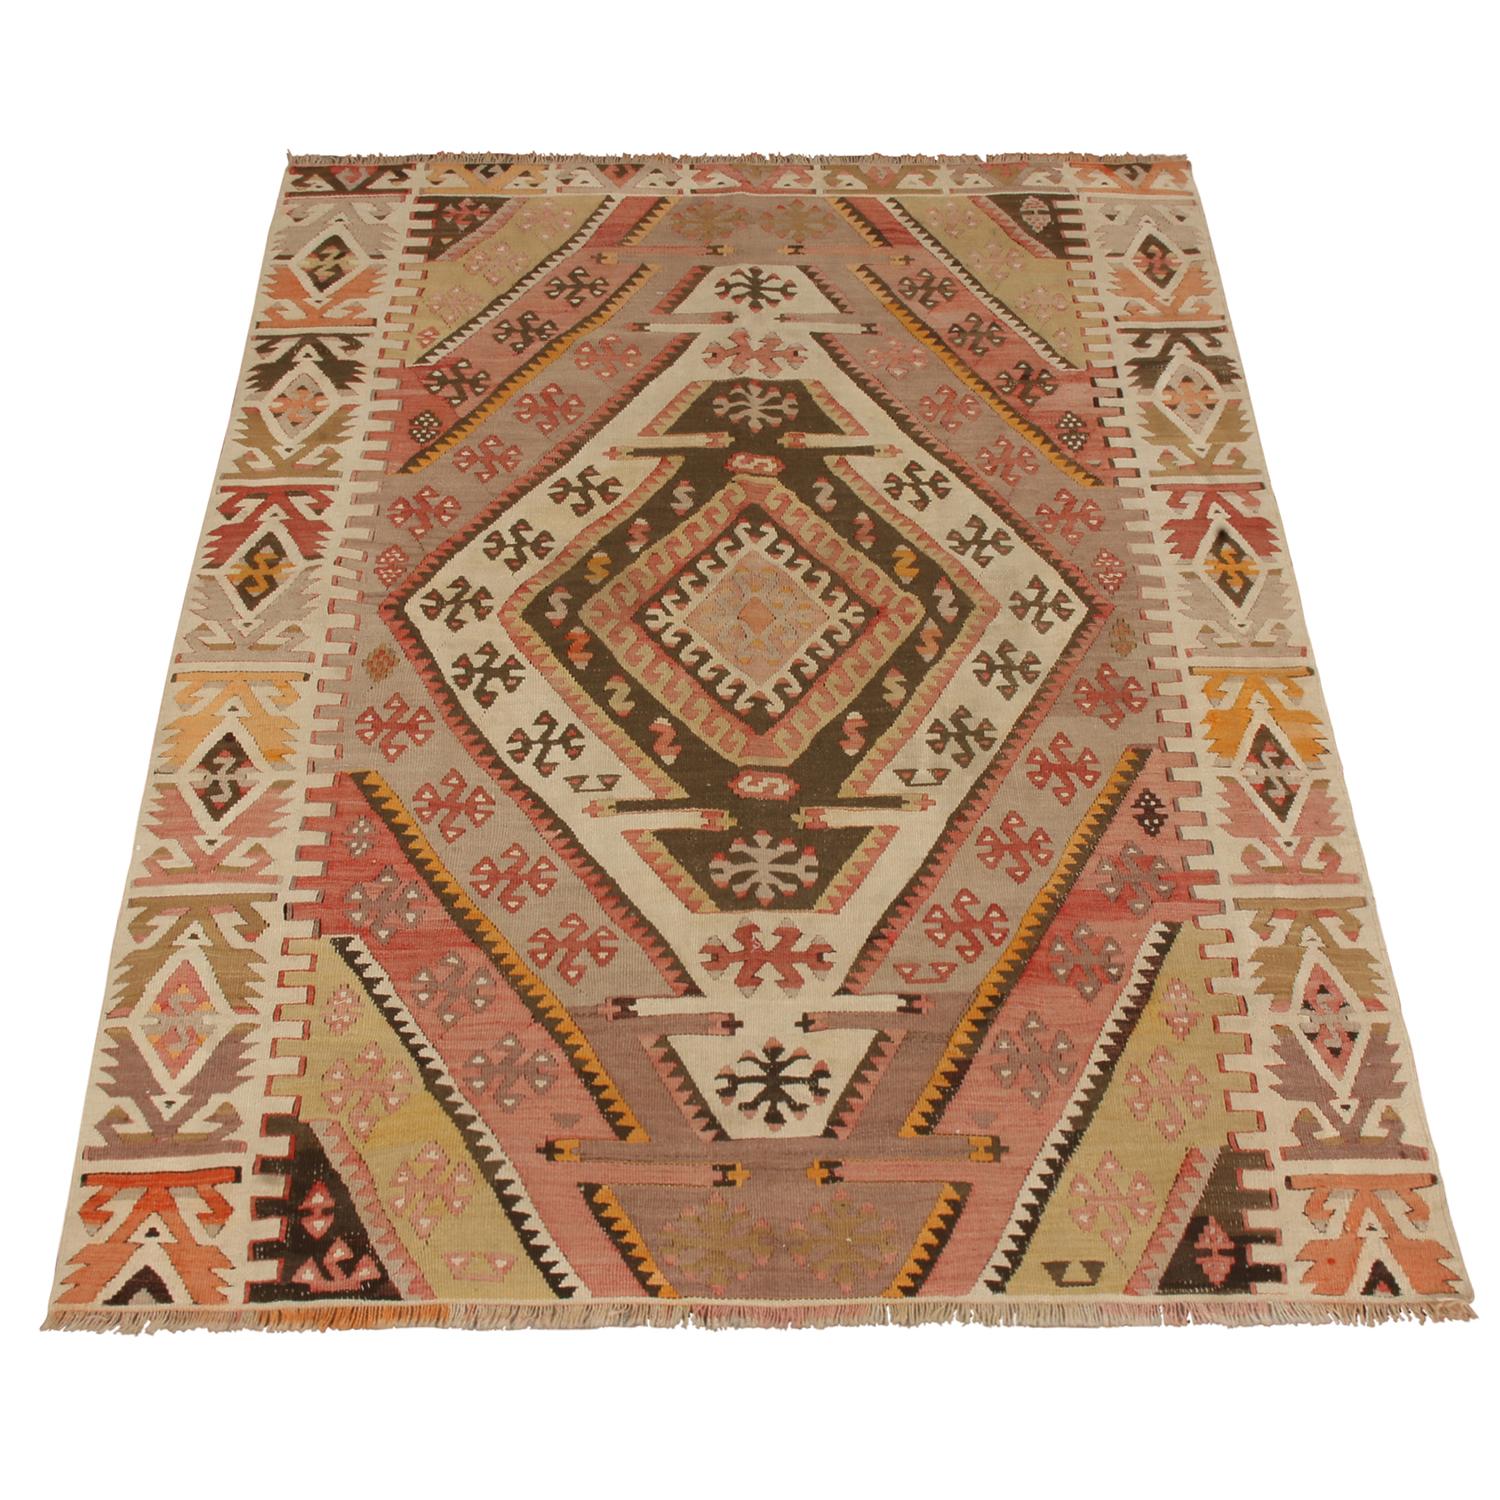 Flat-woven in high-quality wool originating from Turkey between 1940-1950, this vintage Emirdag Kilim rug stands apart from similarly ornate pieces of its family and era for the mixed-symmetry field design, departing from a traditional sense of